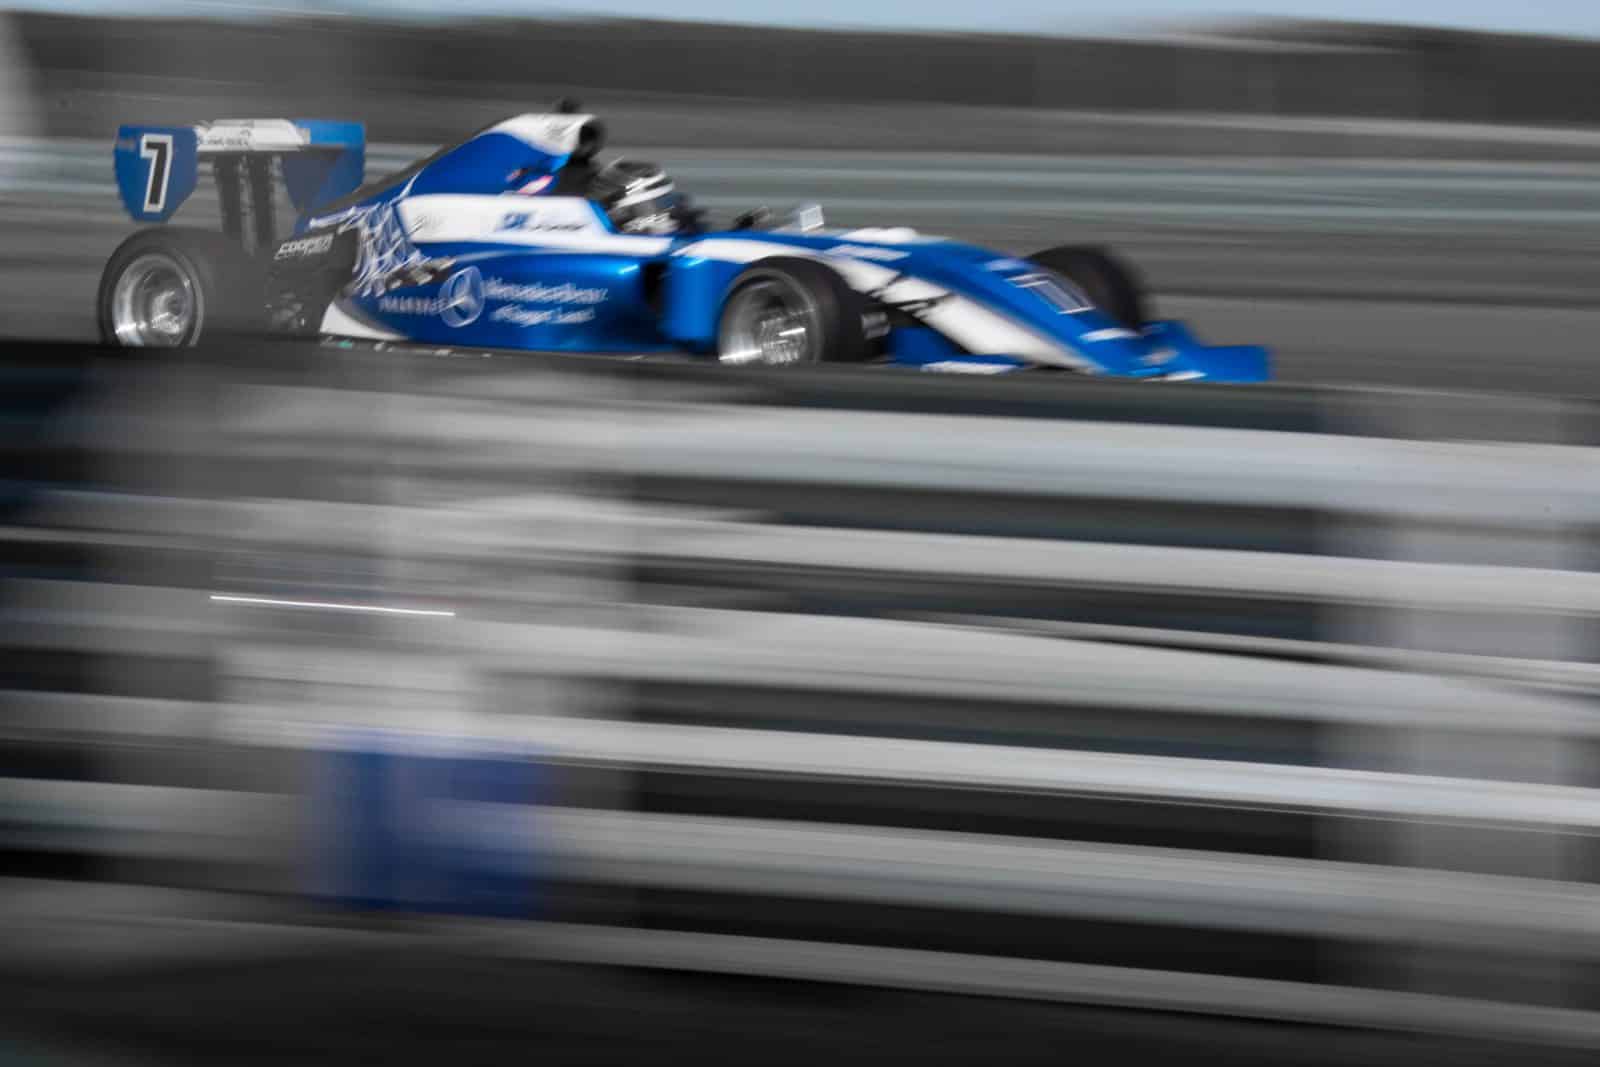 The Road to Indy cars on track at NJMP